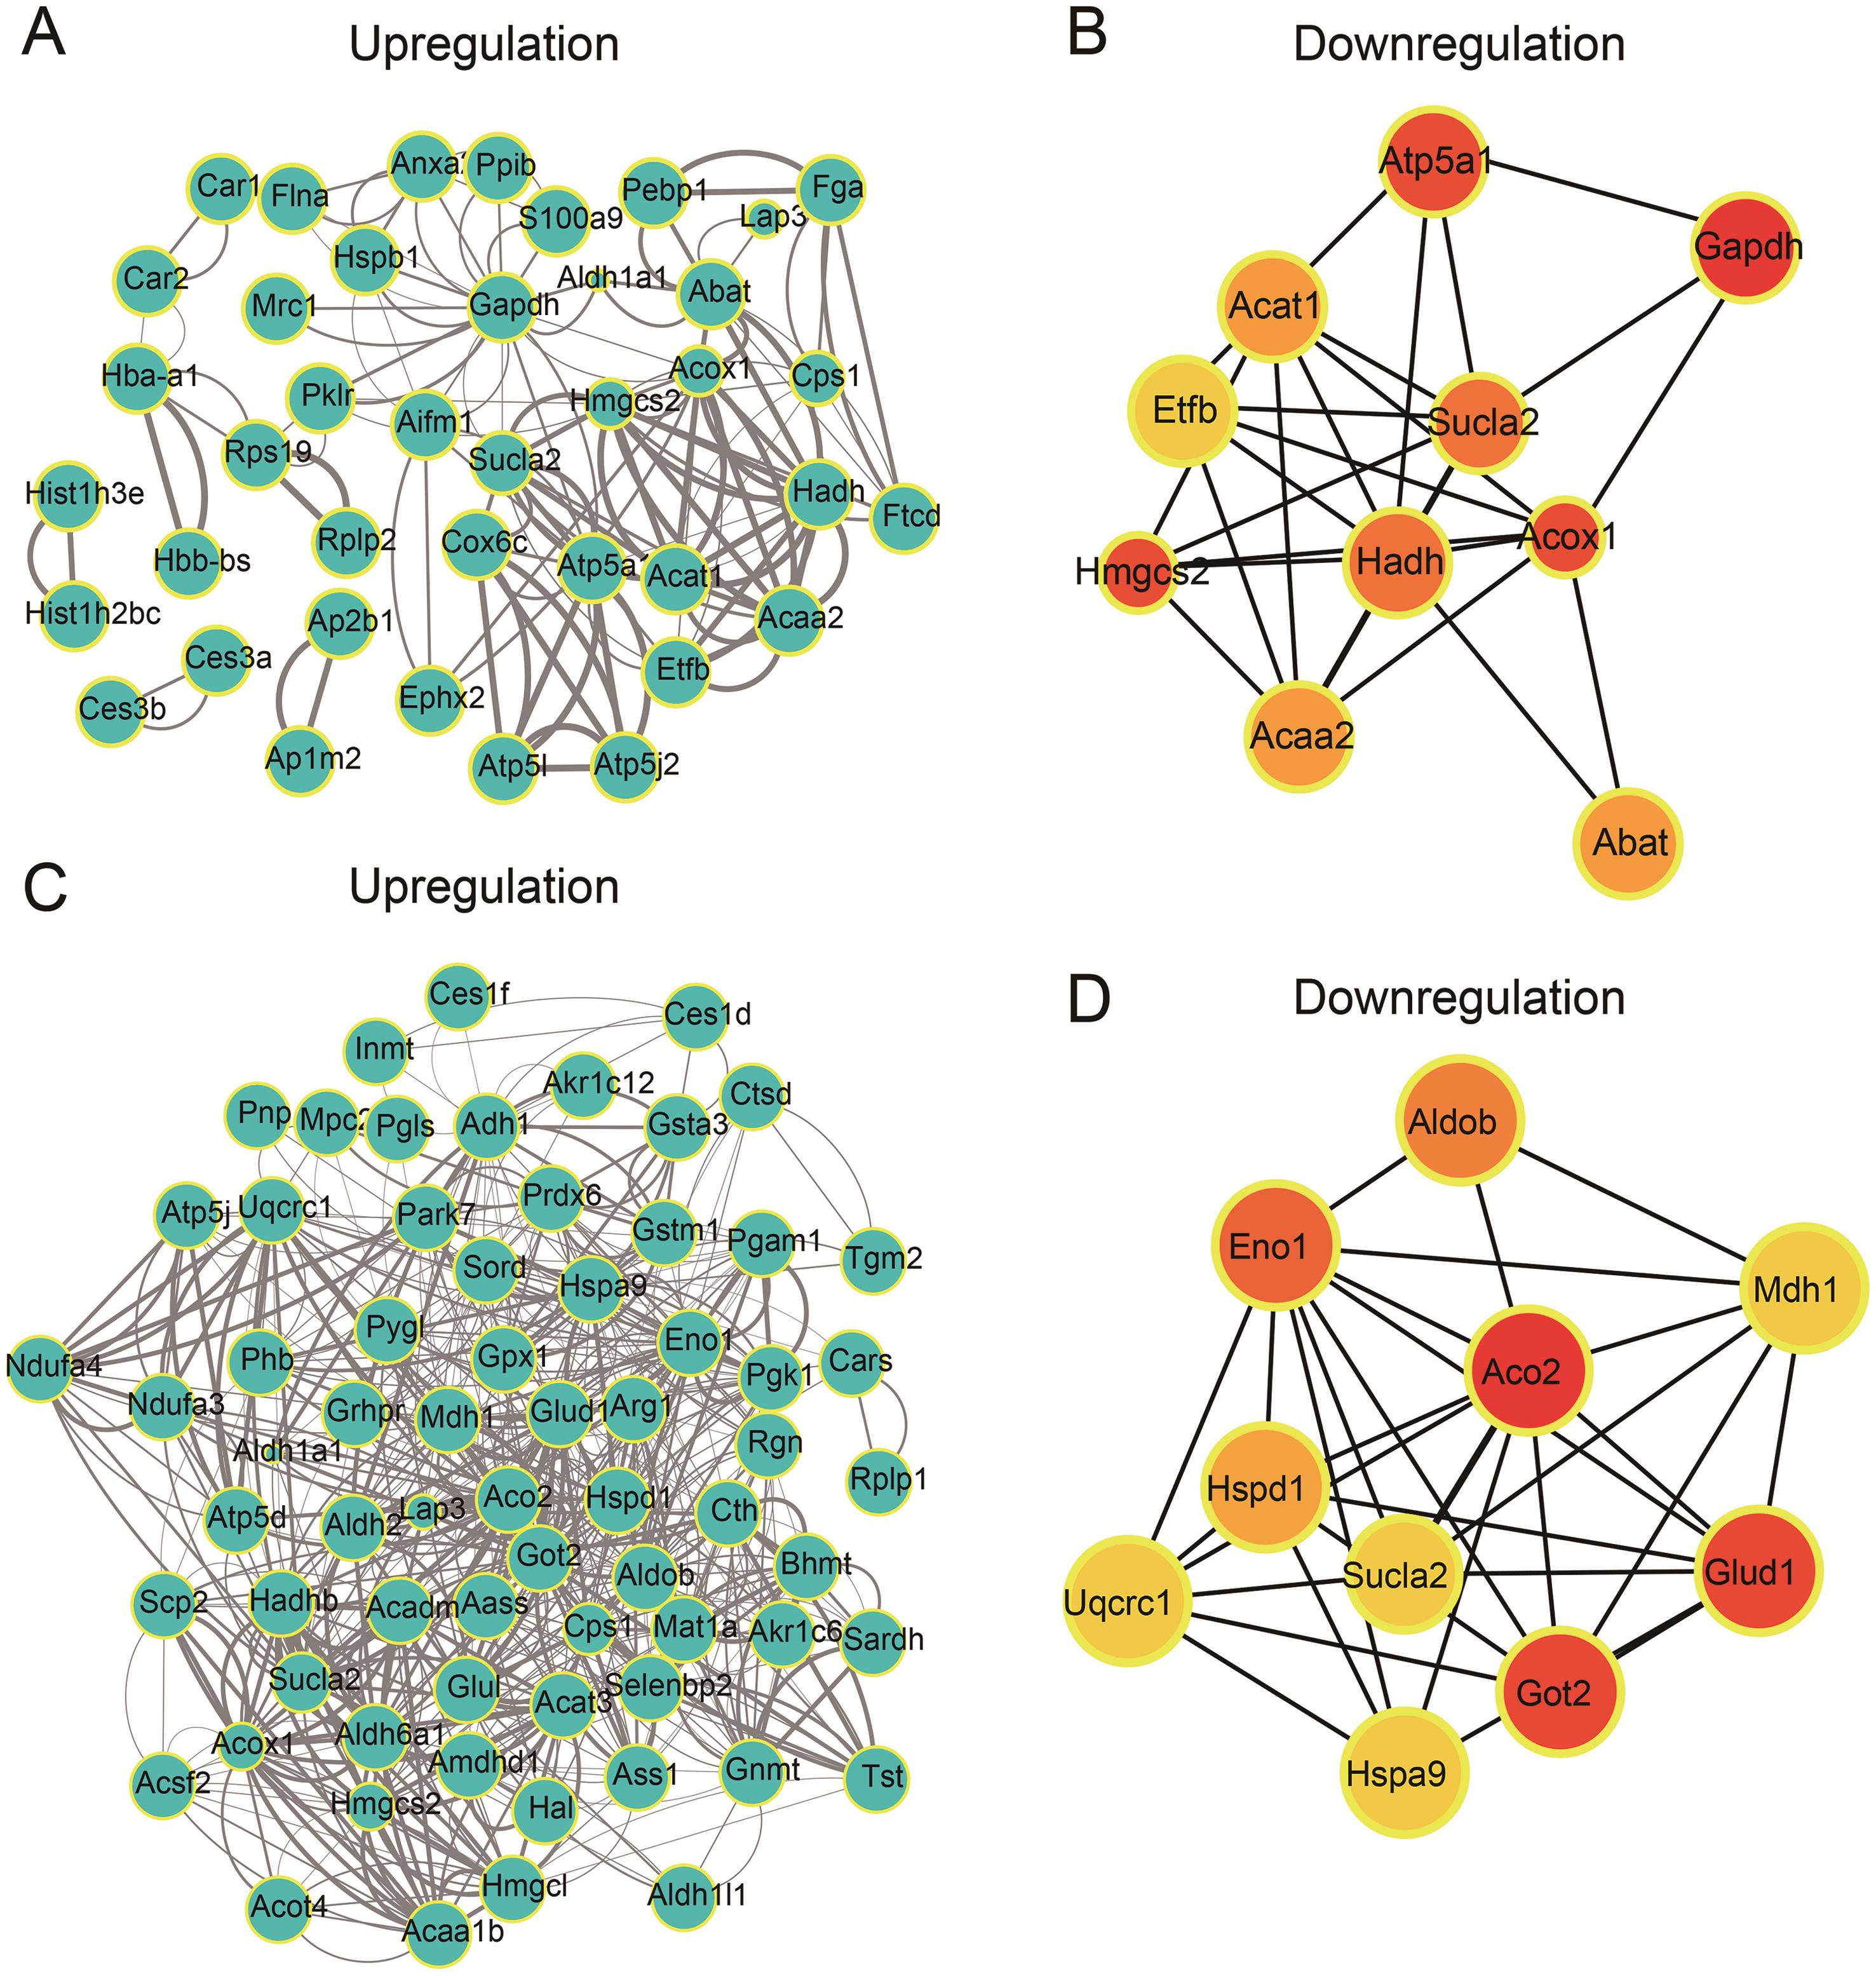 Protein-protein interaction (PPI) network analysis of peptide precursor proteins.